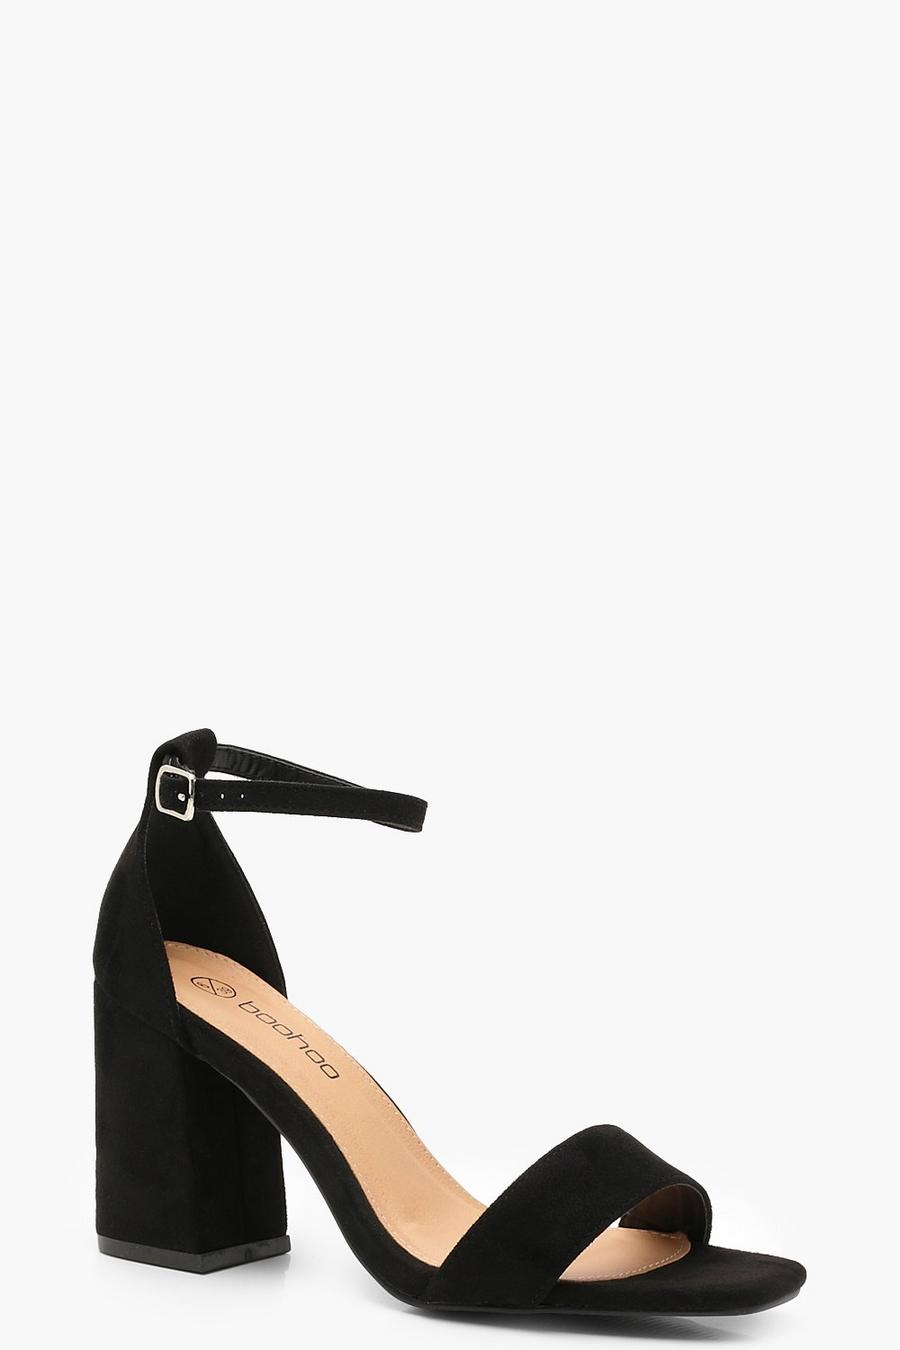 Black Wide Fit Square Toe Two Part Block Heels image number 1